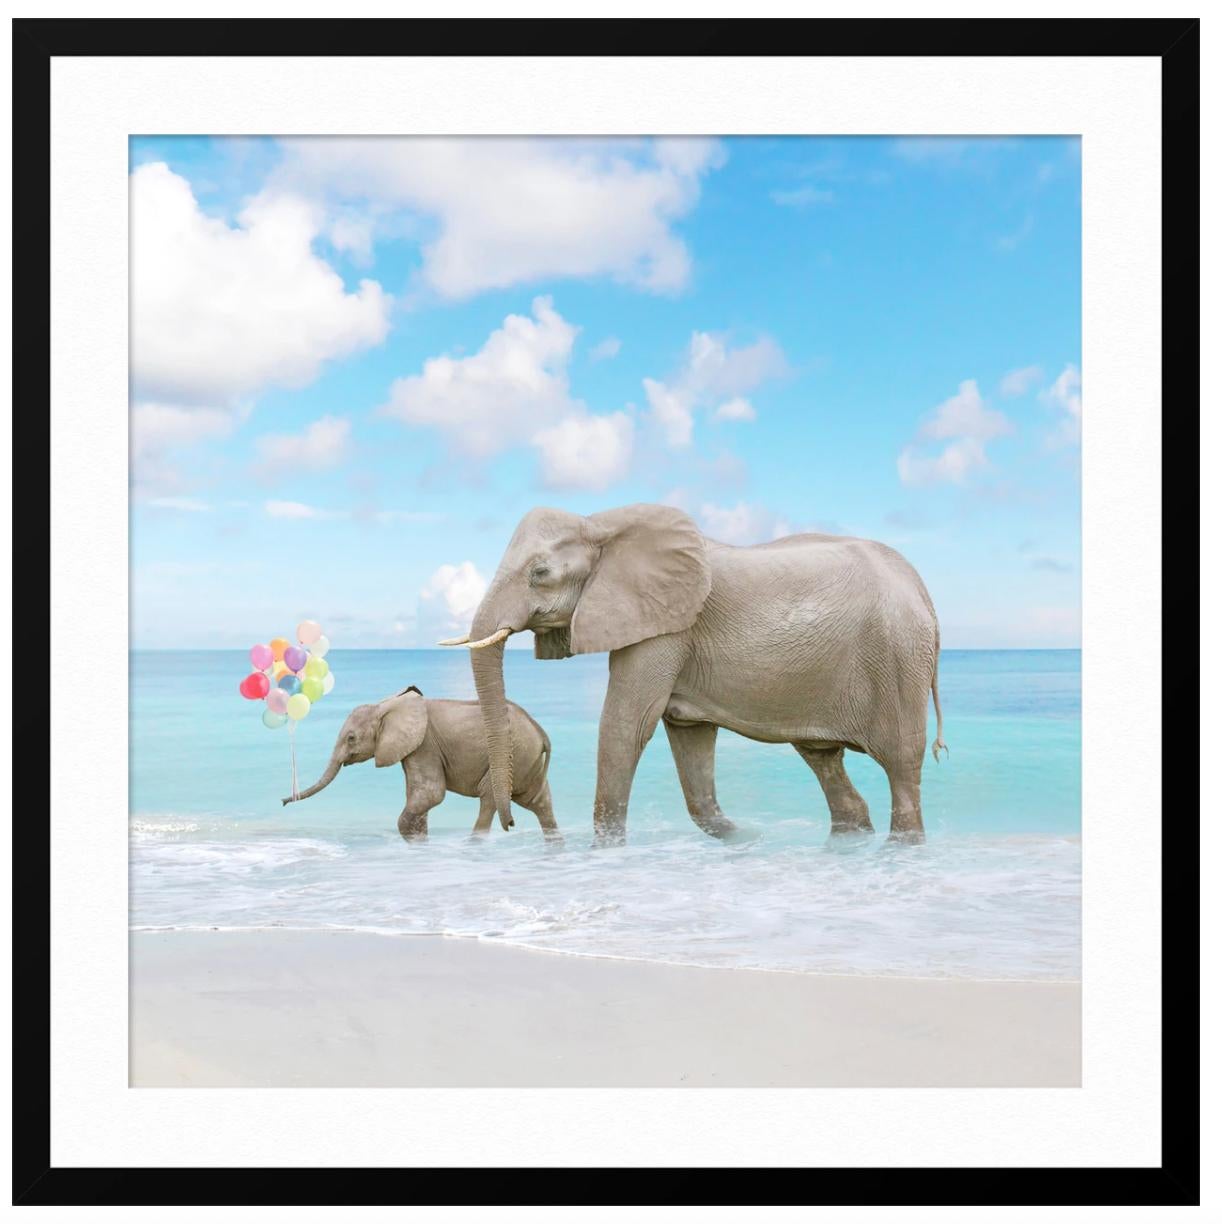 THIS PIECE IS AVAILABLE FRAMED.  Please reach out to the gallery for additional information. 

ABOUT THIS ARTIST: Erin Summer is an artist and graphic designer from Toronto, Canada. Her passion is creating colourful and whimsical images that